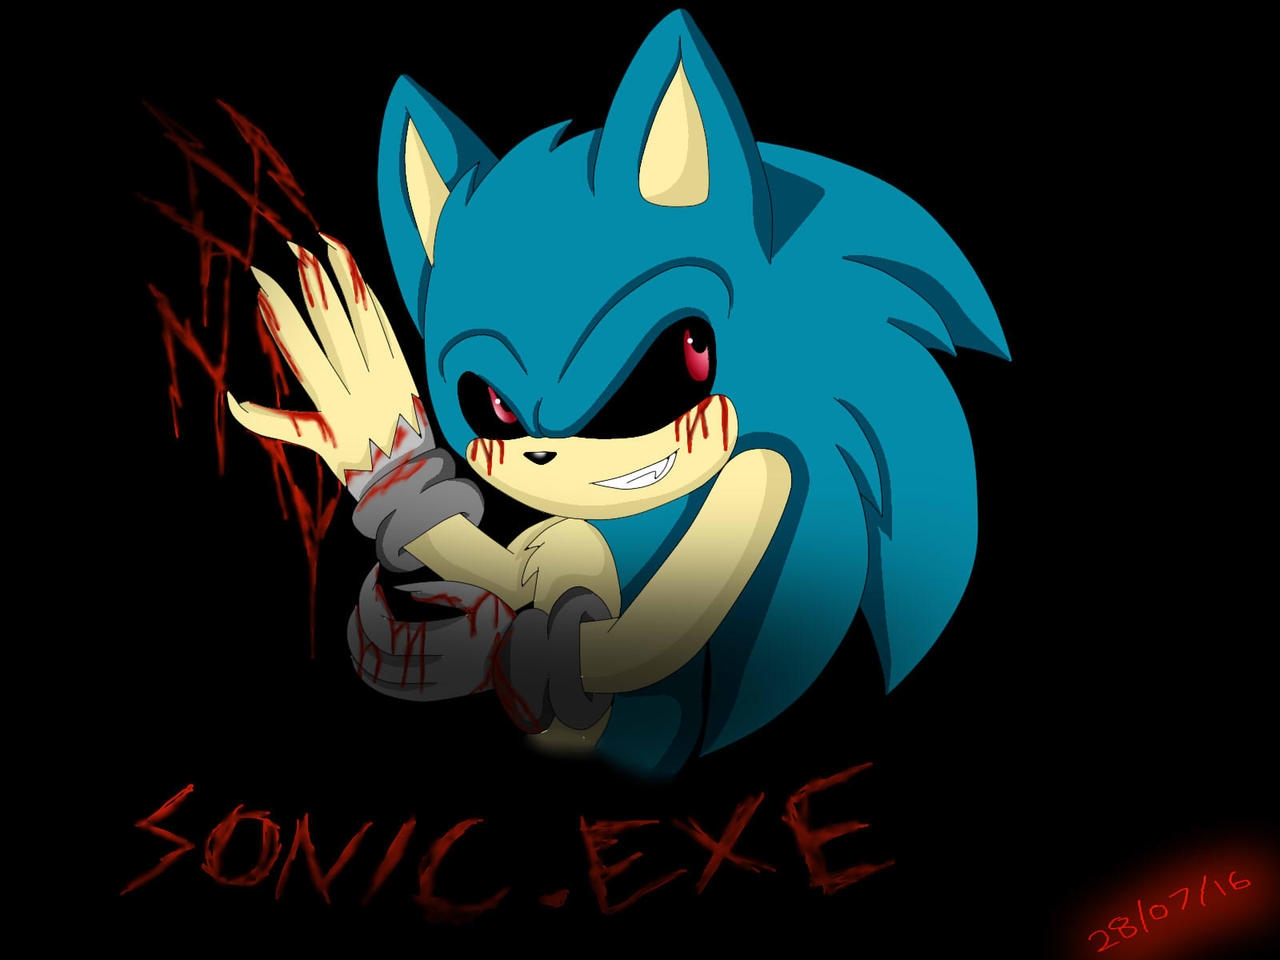 Sonic exe all exes